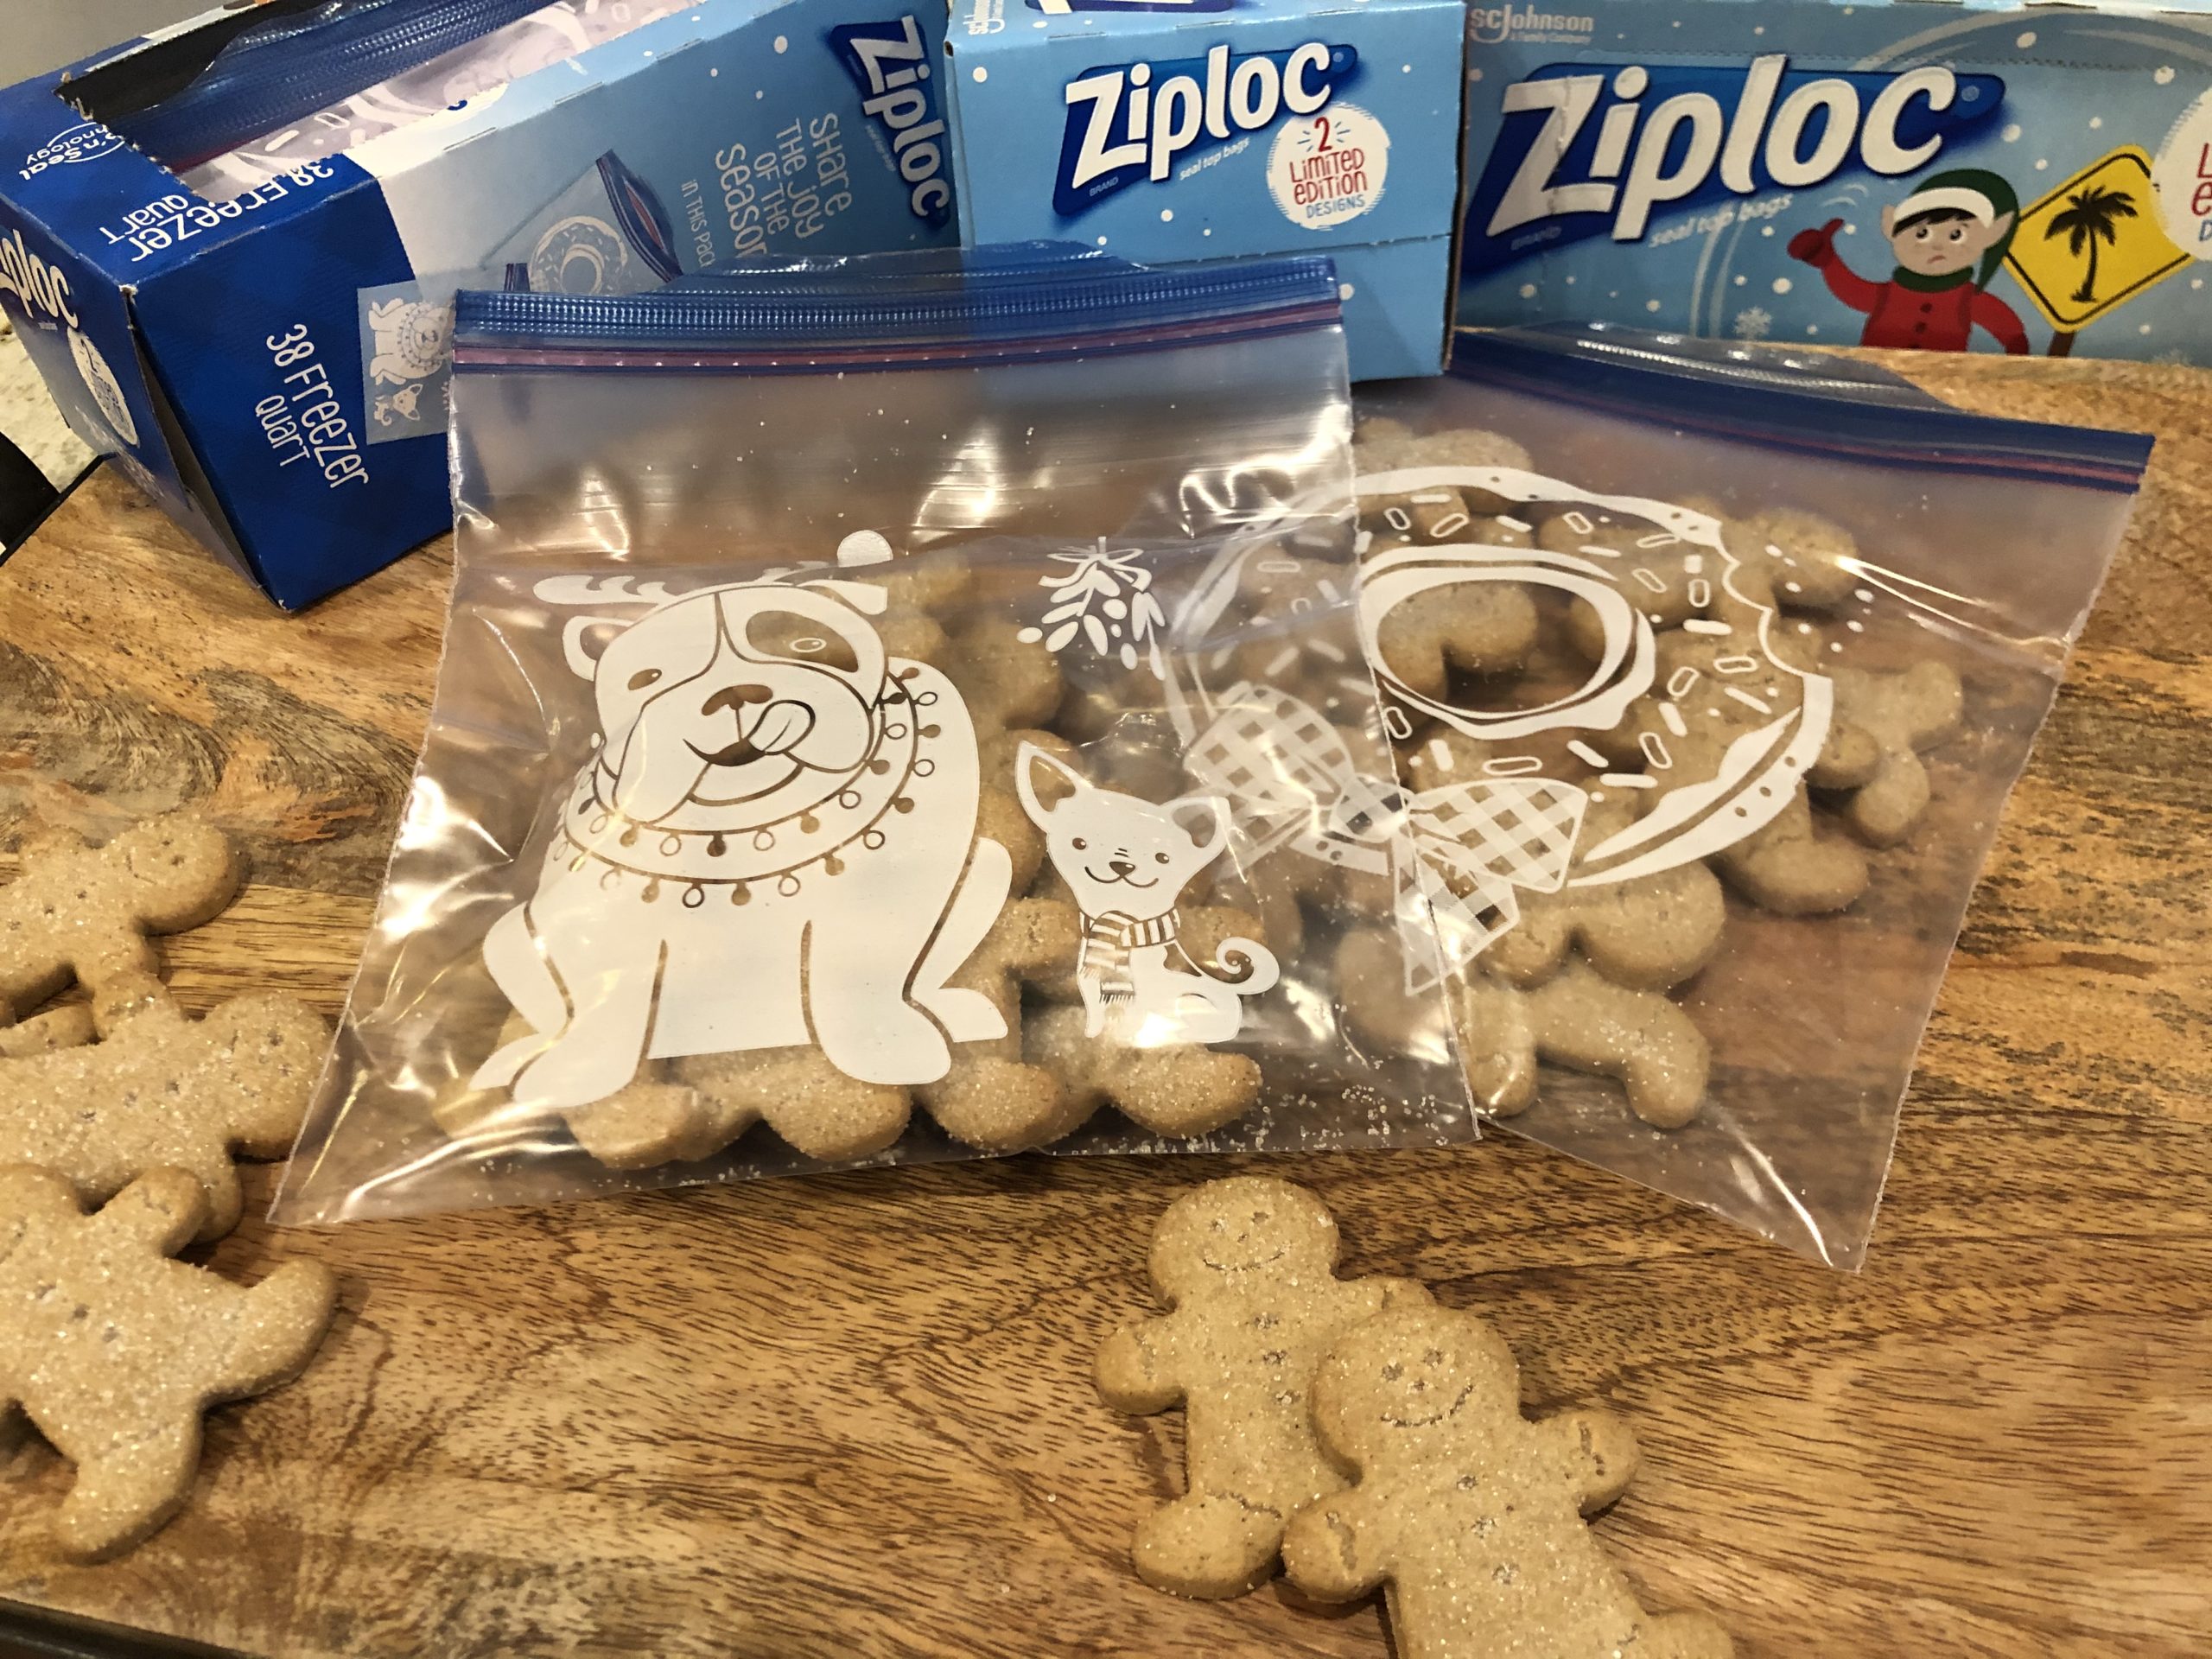 Spread Holiday Cheer With Ziploc® Brand Bags And Containers - Save At Publix on I Heart Publix 2